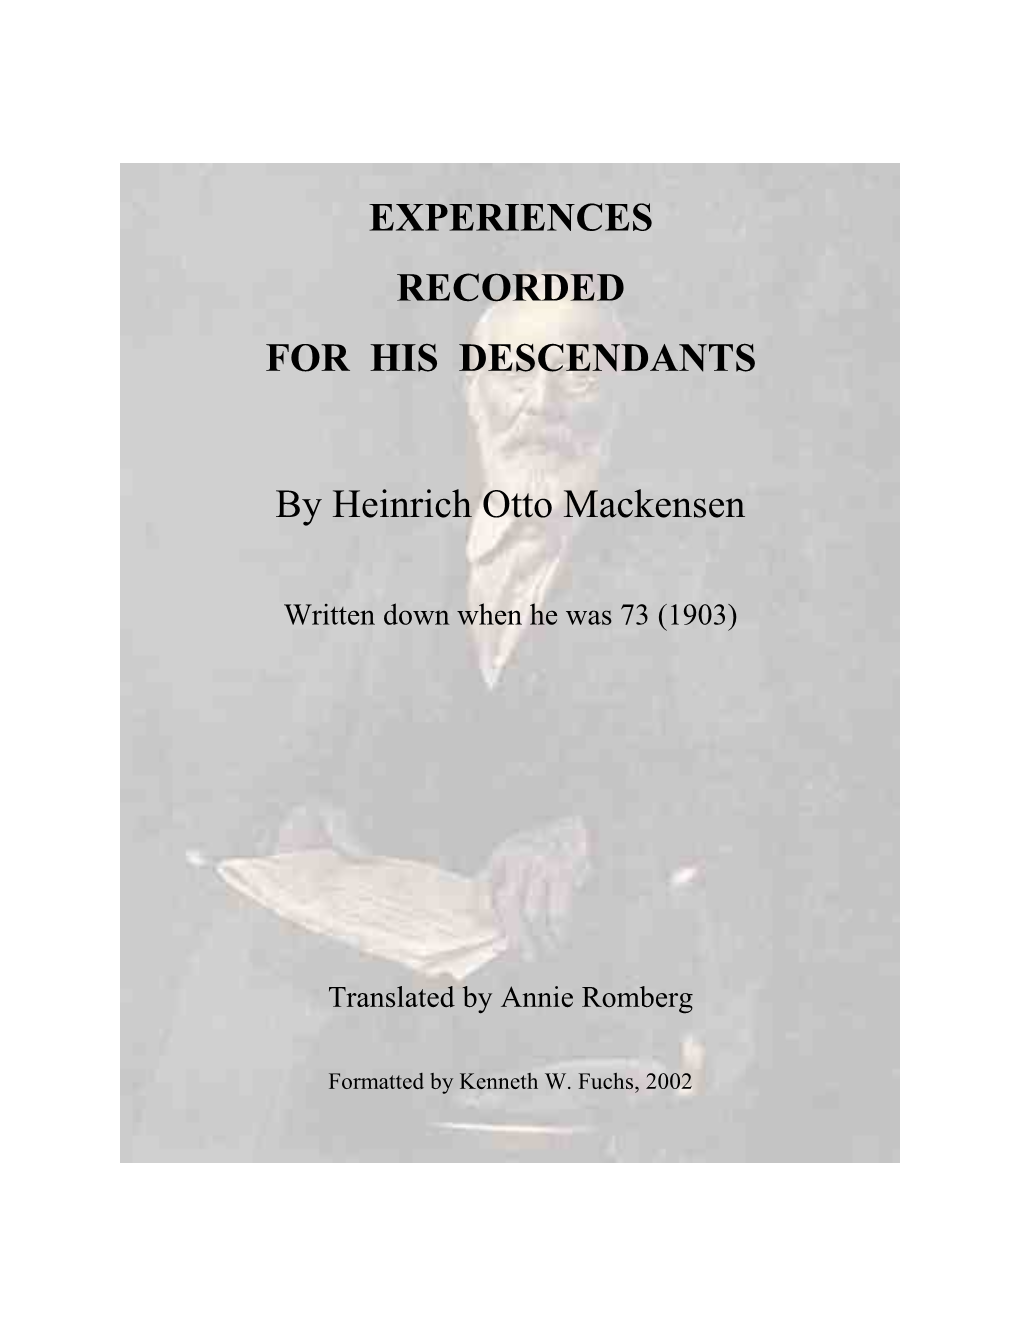 EXPERIENCES RECORDED for HIS DESCENDANTS by Heinrich